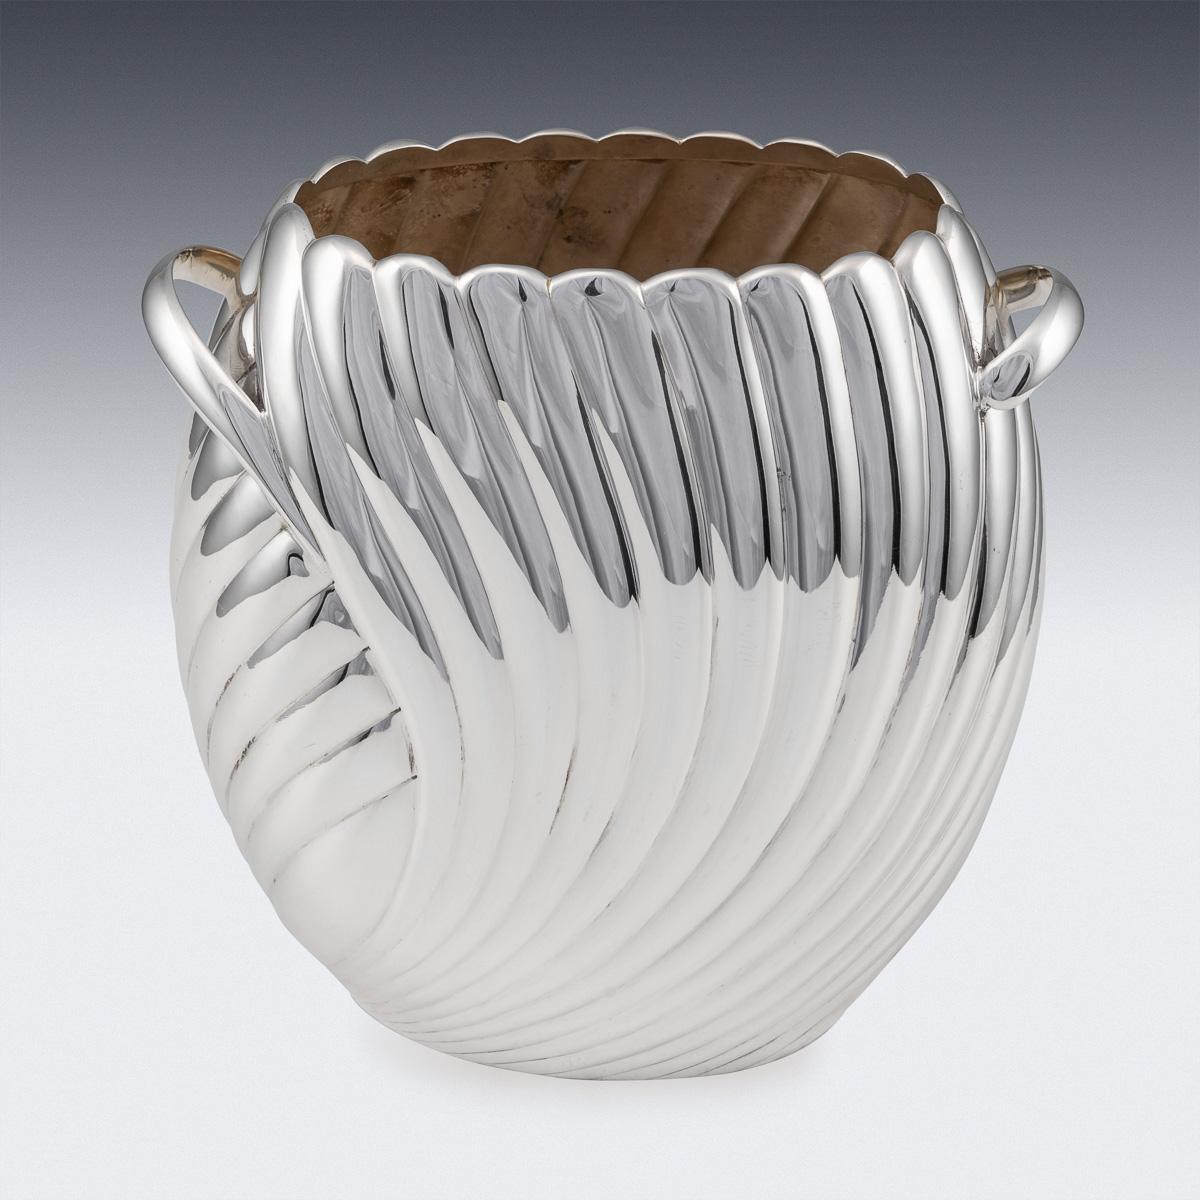 Elegant 20th century Italian solid silver vase, the body applied with a decorative half fluted bands, each side applied with an elegant handle and richly gilt interior. Hallmarked Italian silver (925 standard), Maker F.C (Fratelli Cacchione), Hand